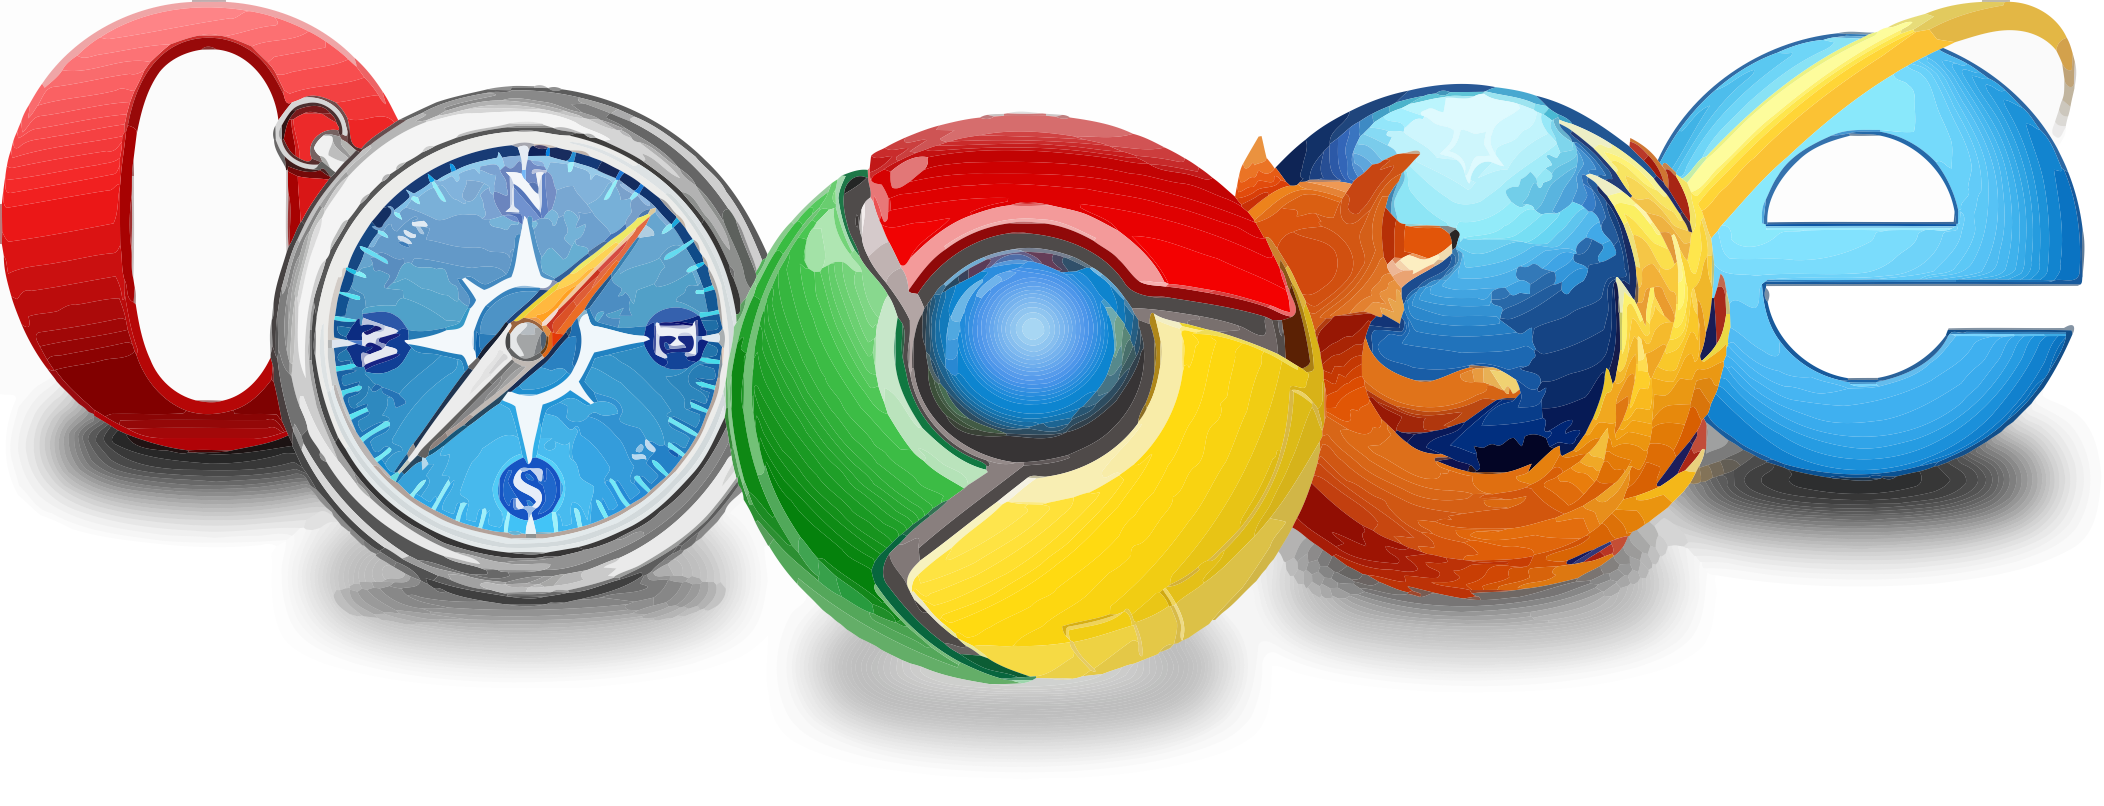 image of browser icons